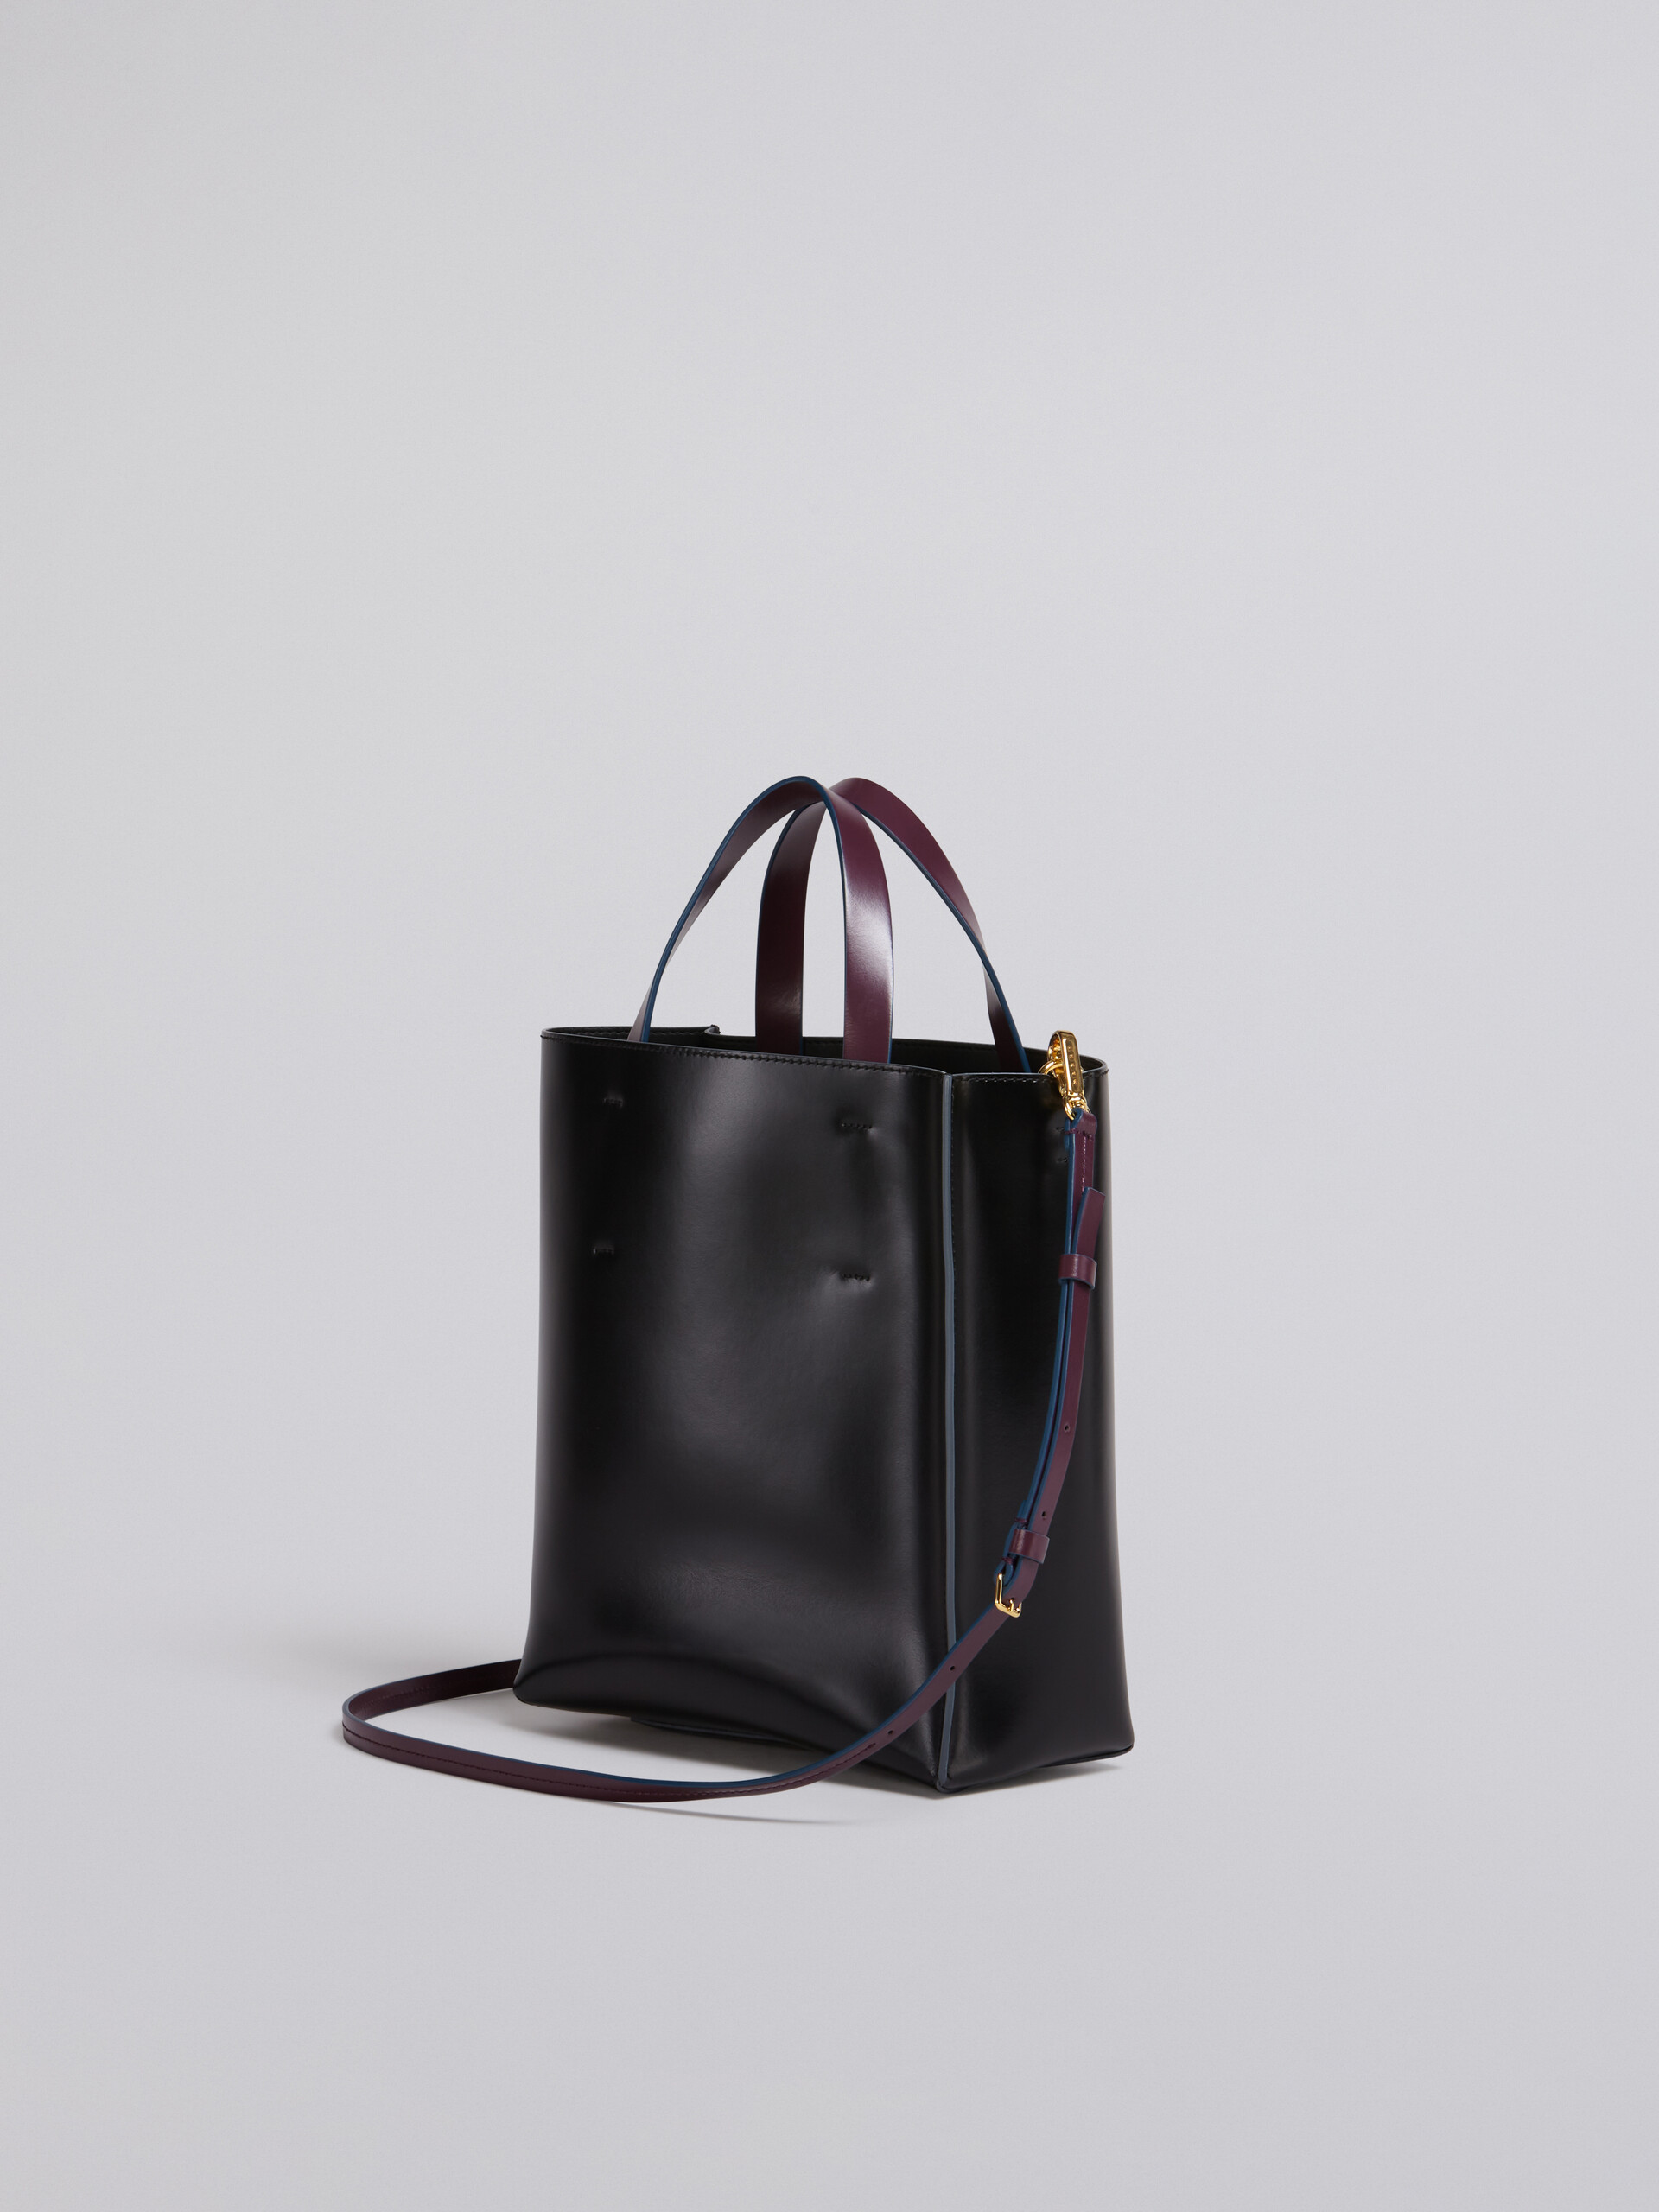 MUSEO shopping bag in shiny smooth calfskin - Shopping Bags - Image 3